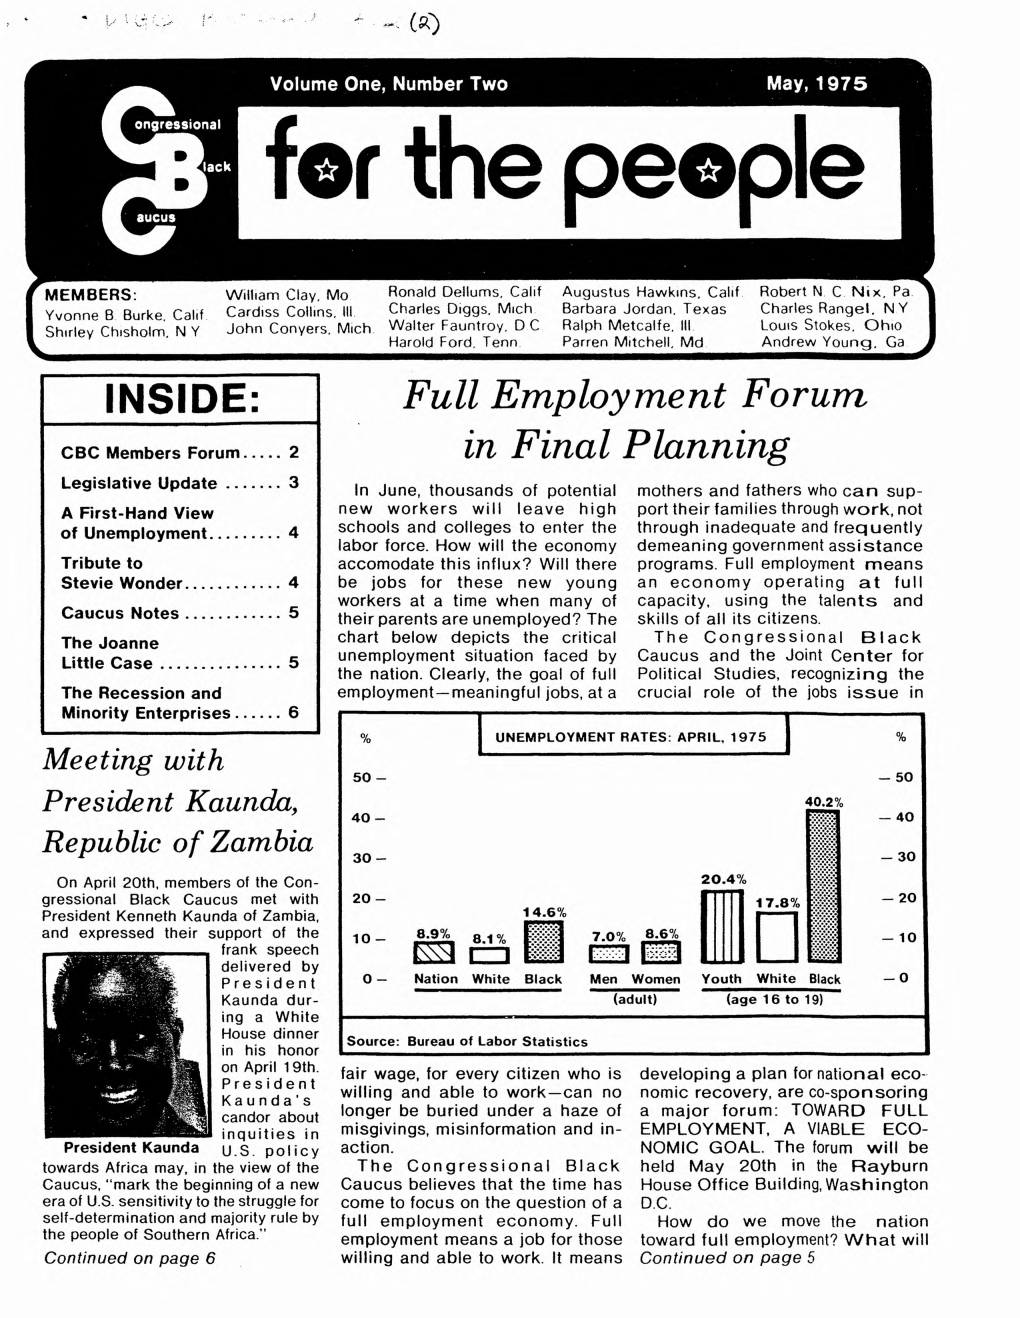 CBC Newsletter, May 1975